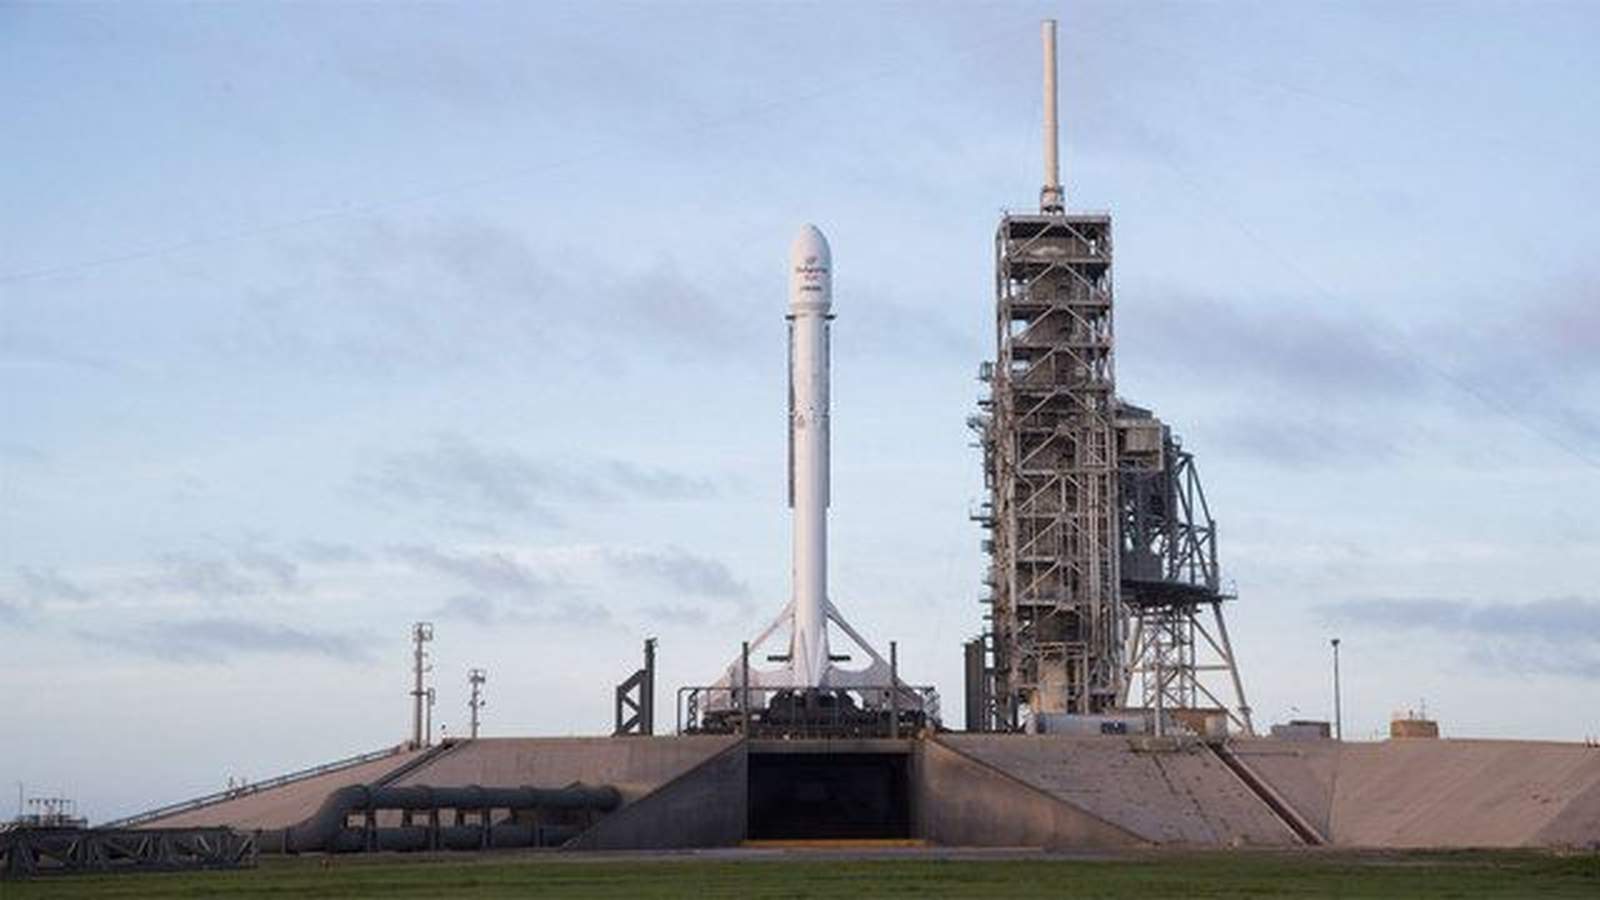 LIVE: SpaceX launching Falcon 9 rocket carrying spy satellite